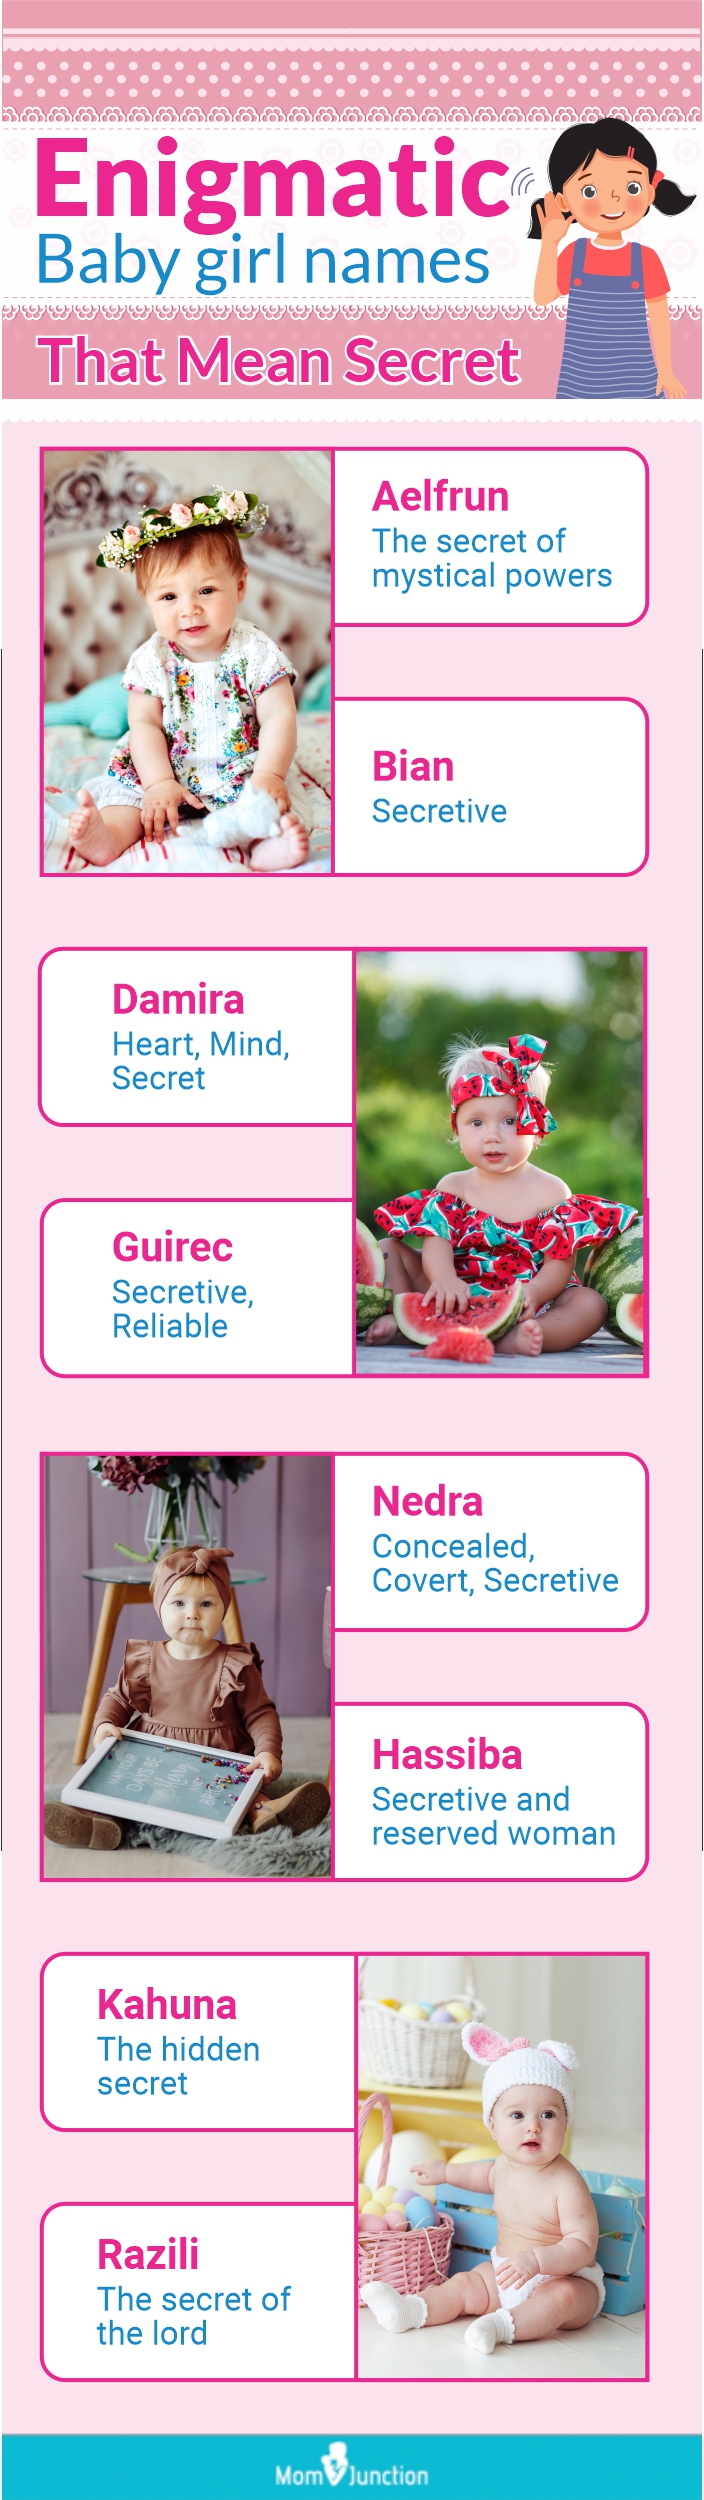 enigmatic baby girl names that mean secret(infographic)